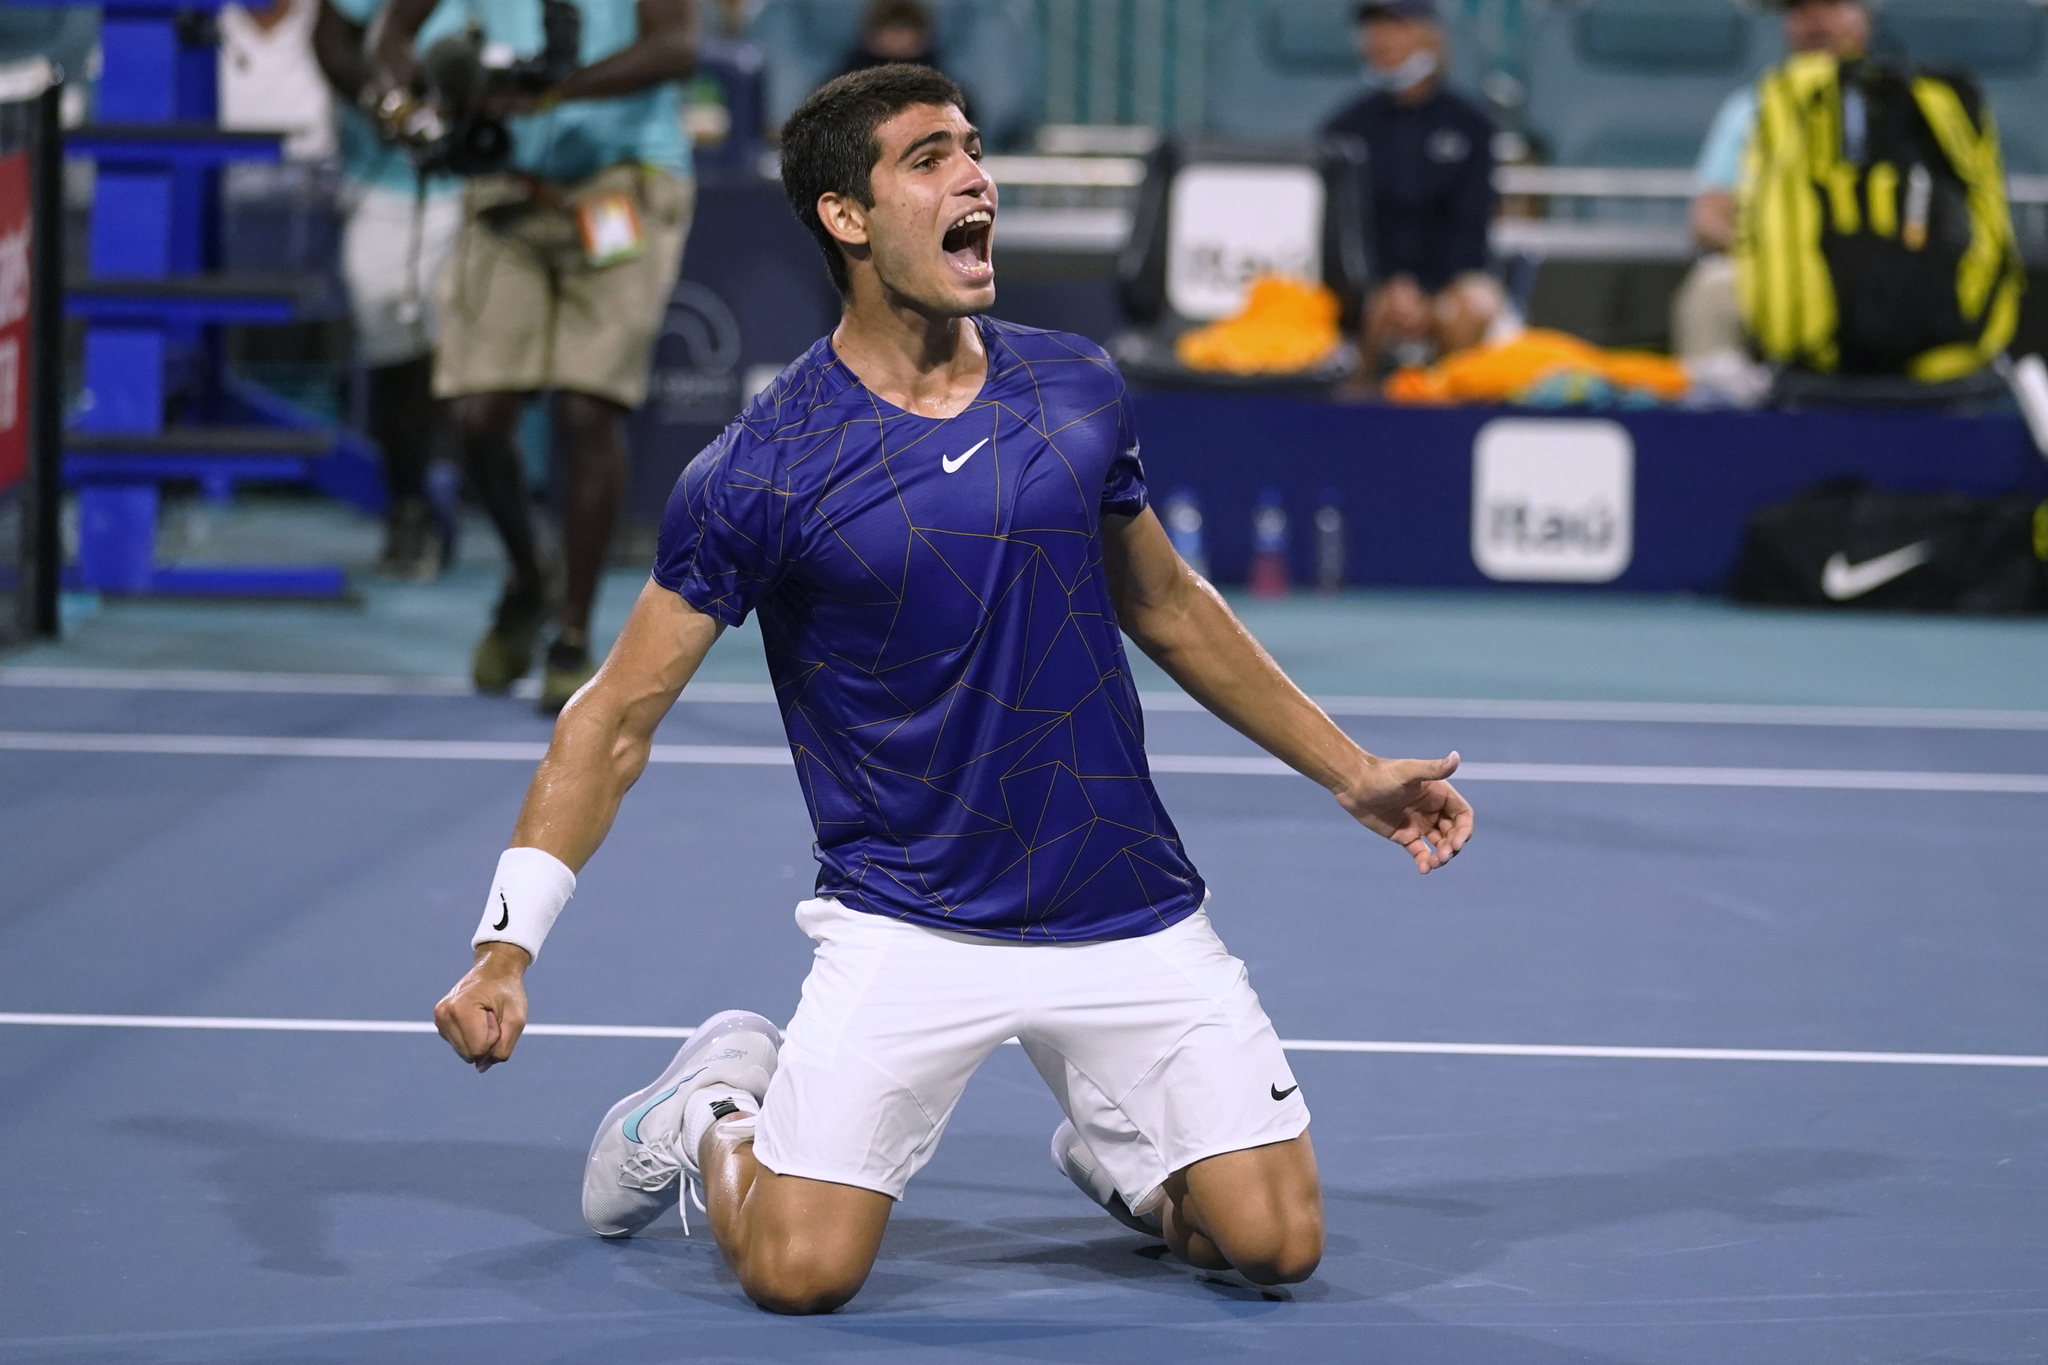 Carlos lt;HIT gt;Alcaraz lt;/HIT gt;, of Spain, kneels on the court after defeating Miomir Kecmanovic, of Serbia, during the Miami Open tennis tournament Thursday, March 31, 2022, in Miami Gardens, Fla. (AP Photo/Marta Lavandier)